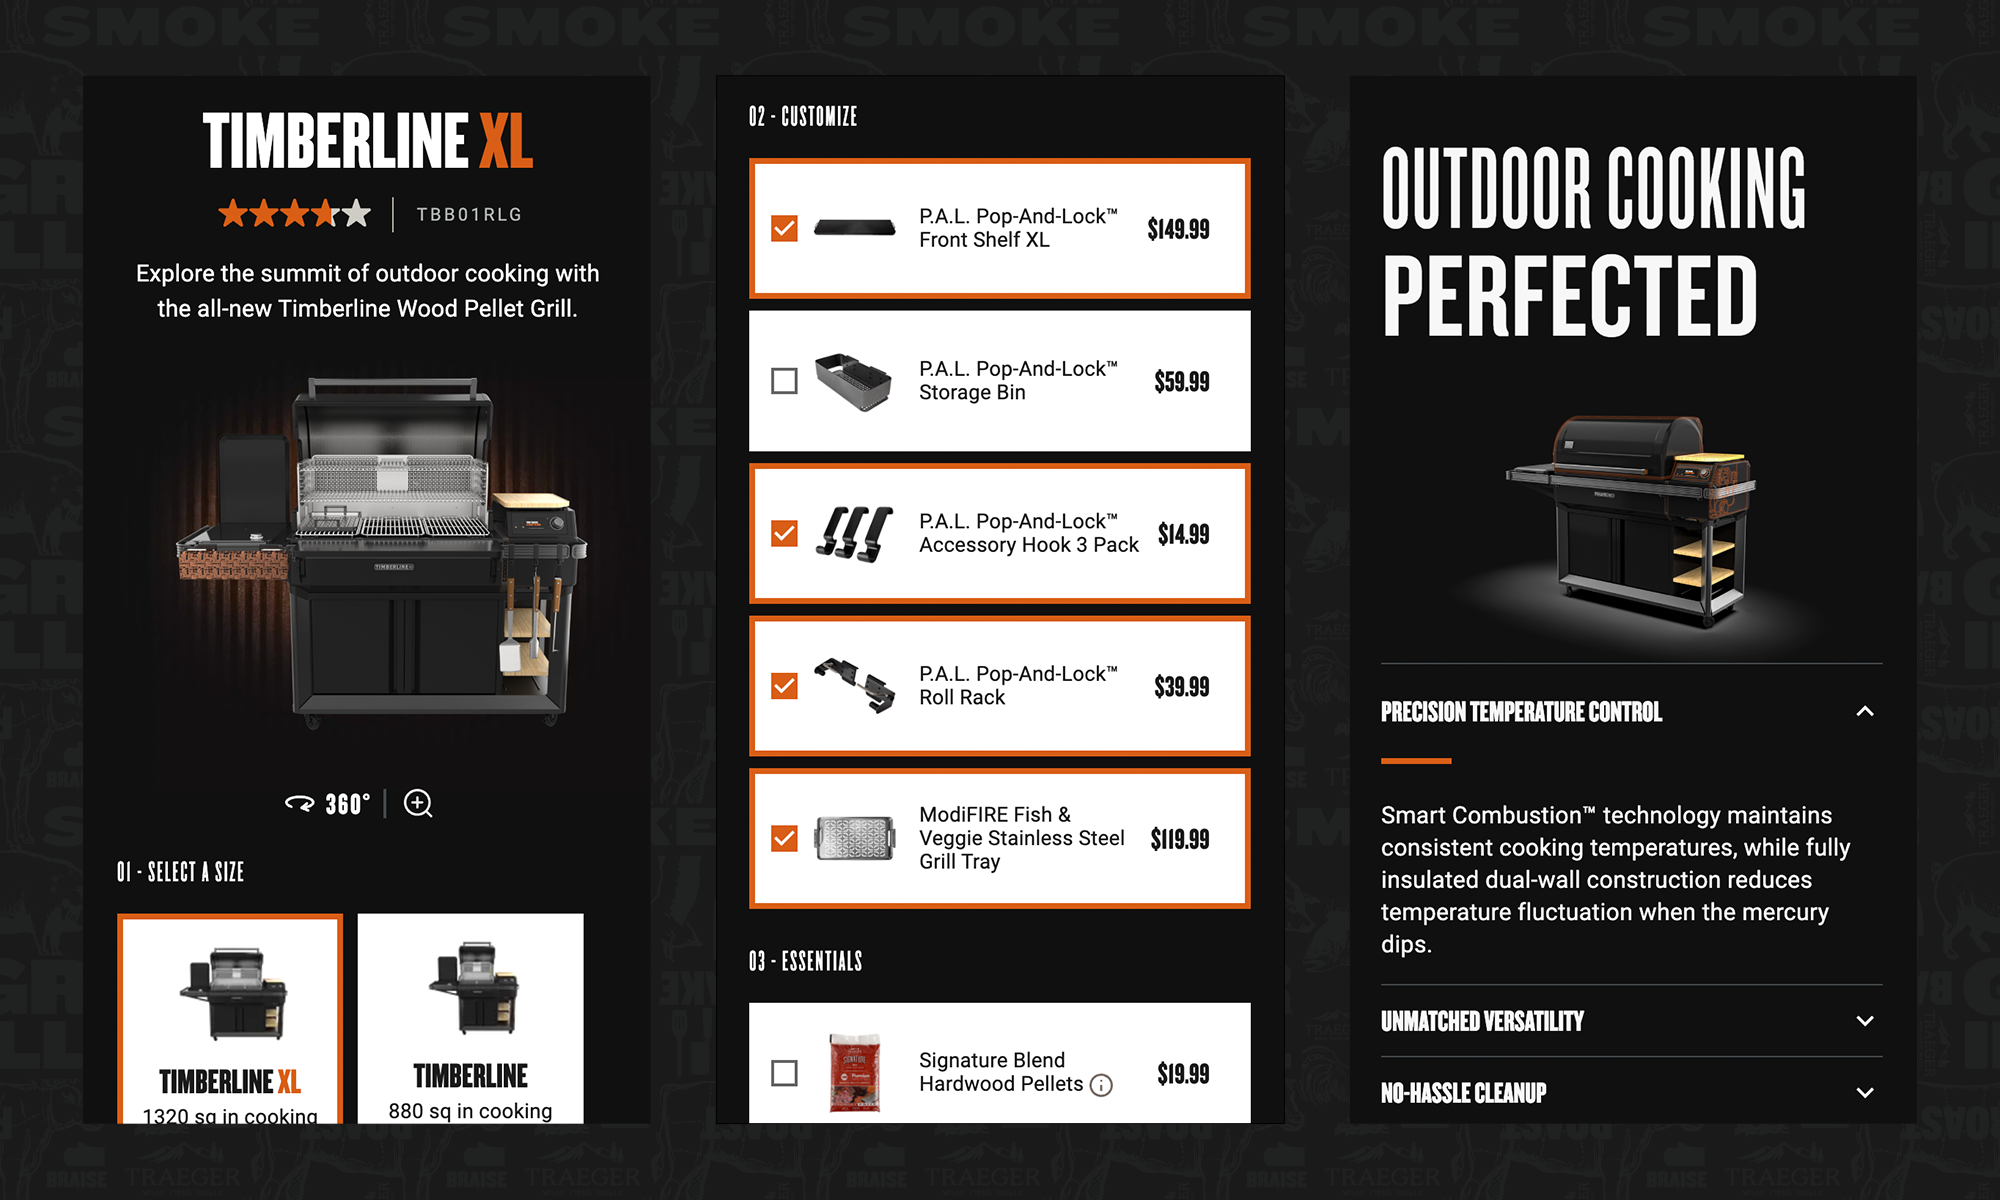 Traeger Timberline XL product detail page mobile design